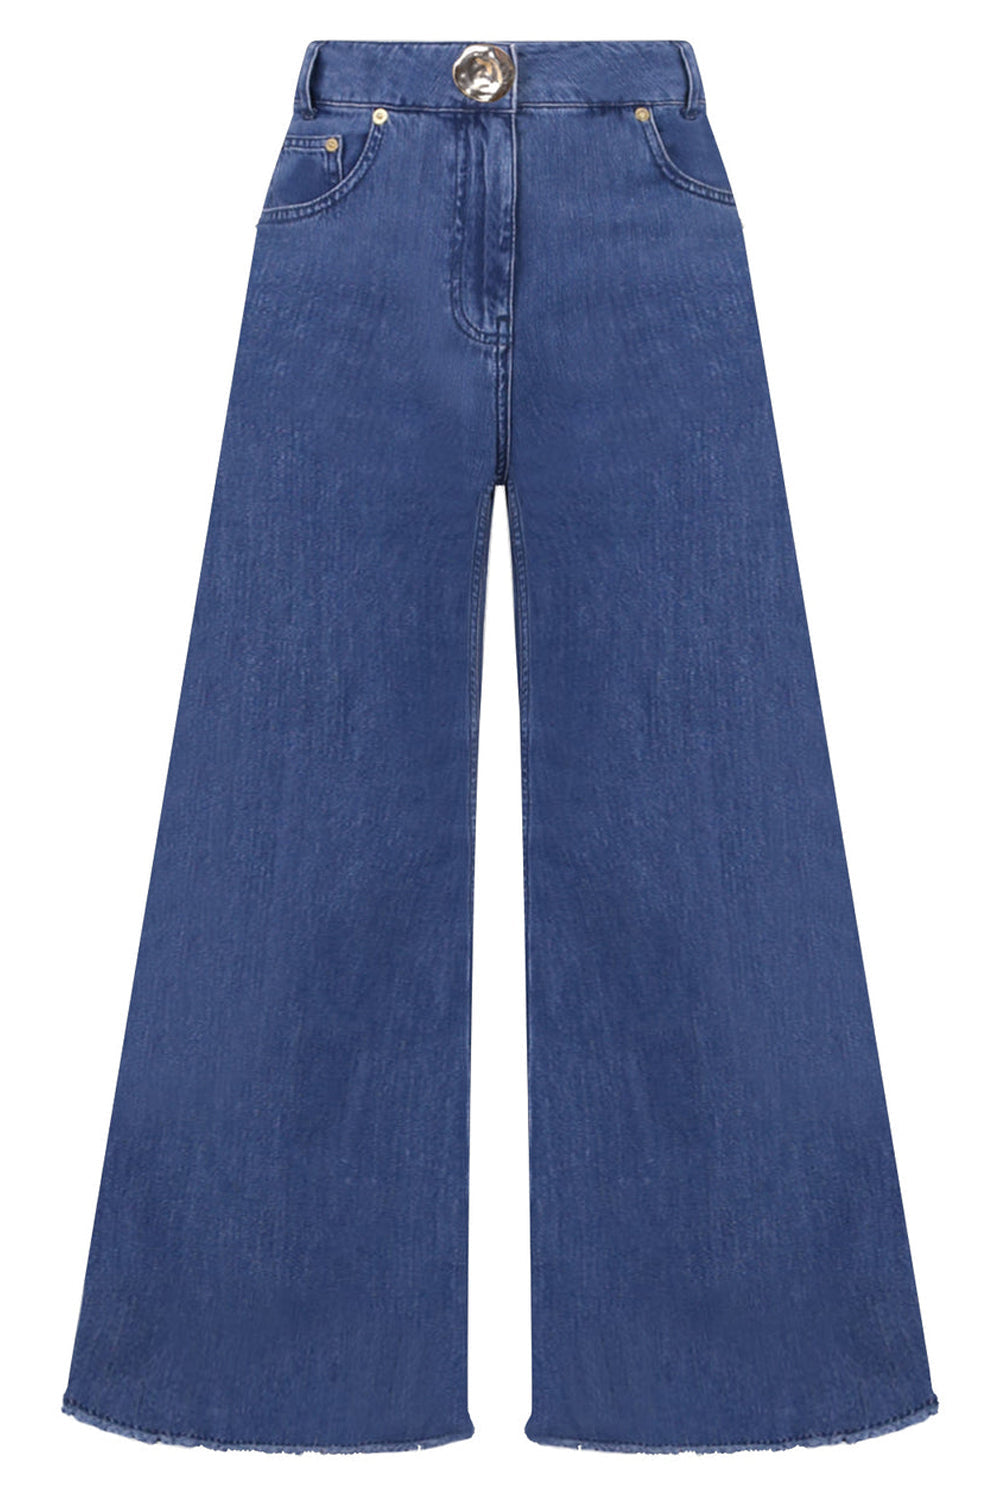 MOTHER OF PEARL PANTS CROPPED WIDE LEG DENIM TROUSERS STONE WASH